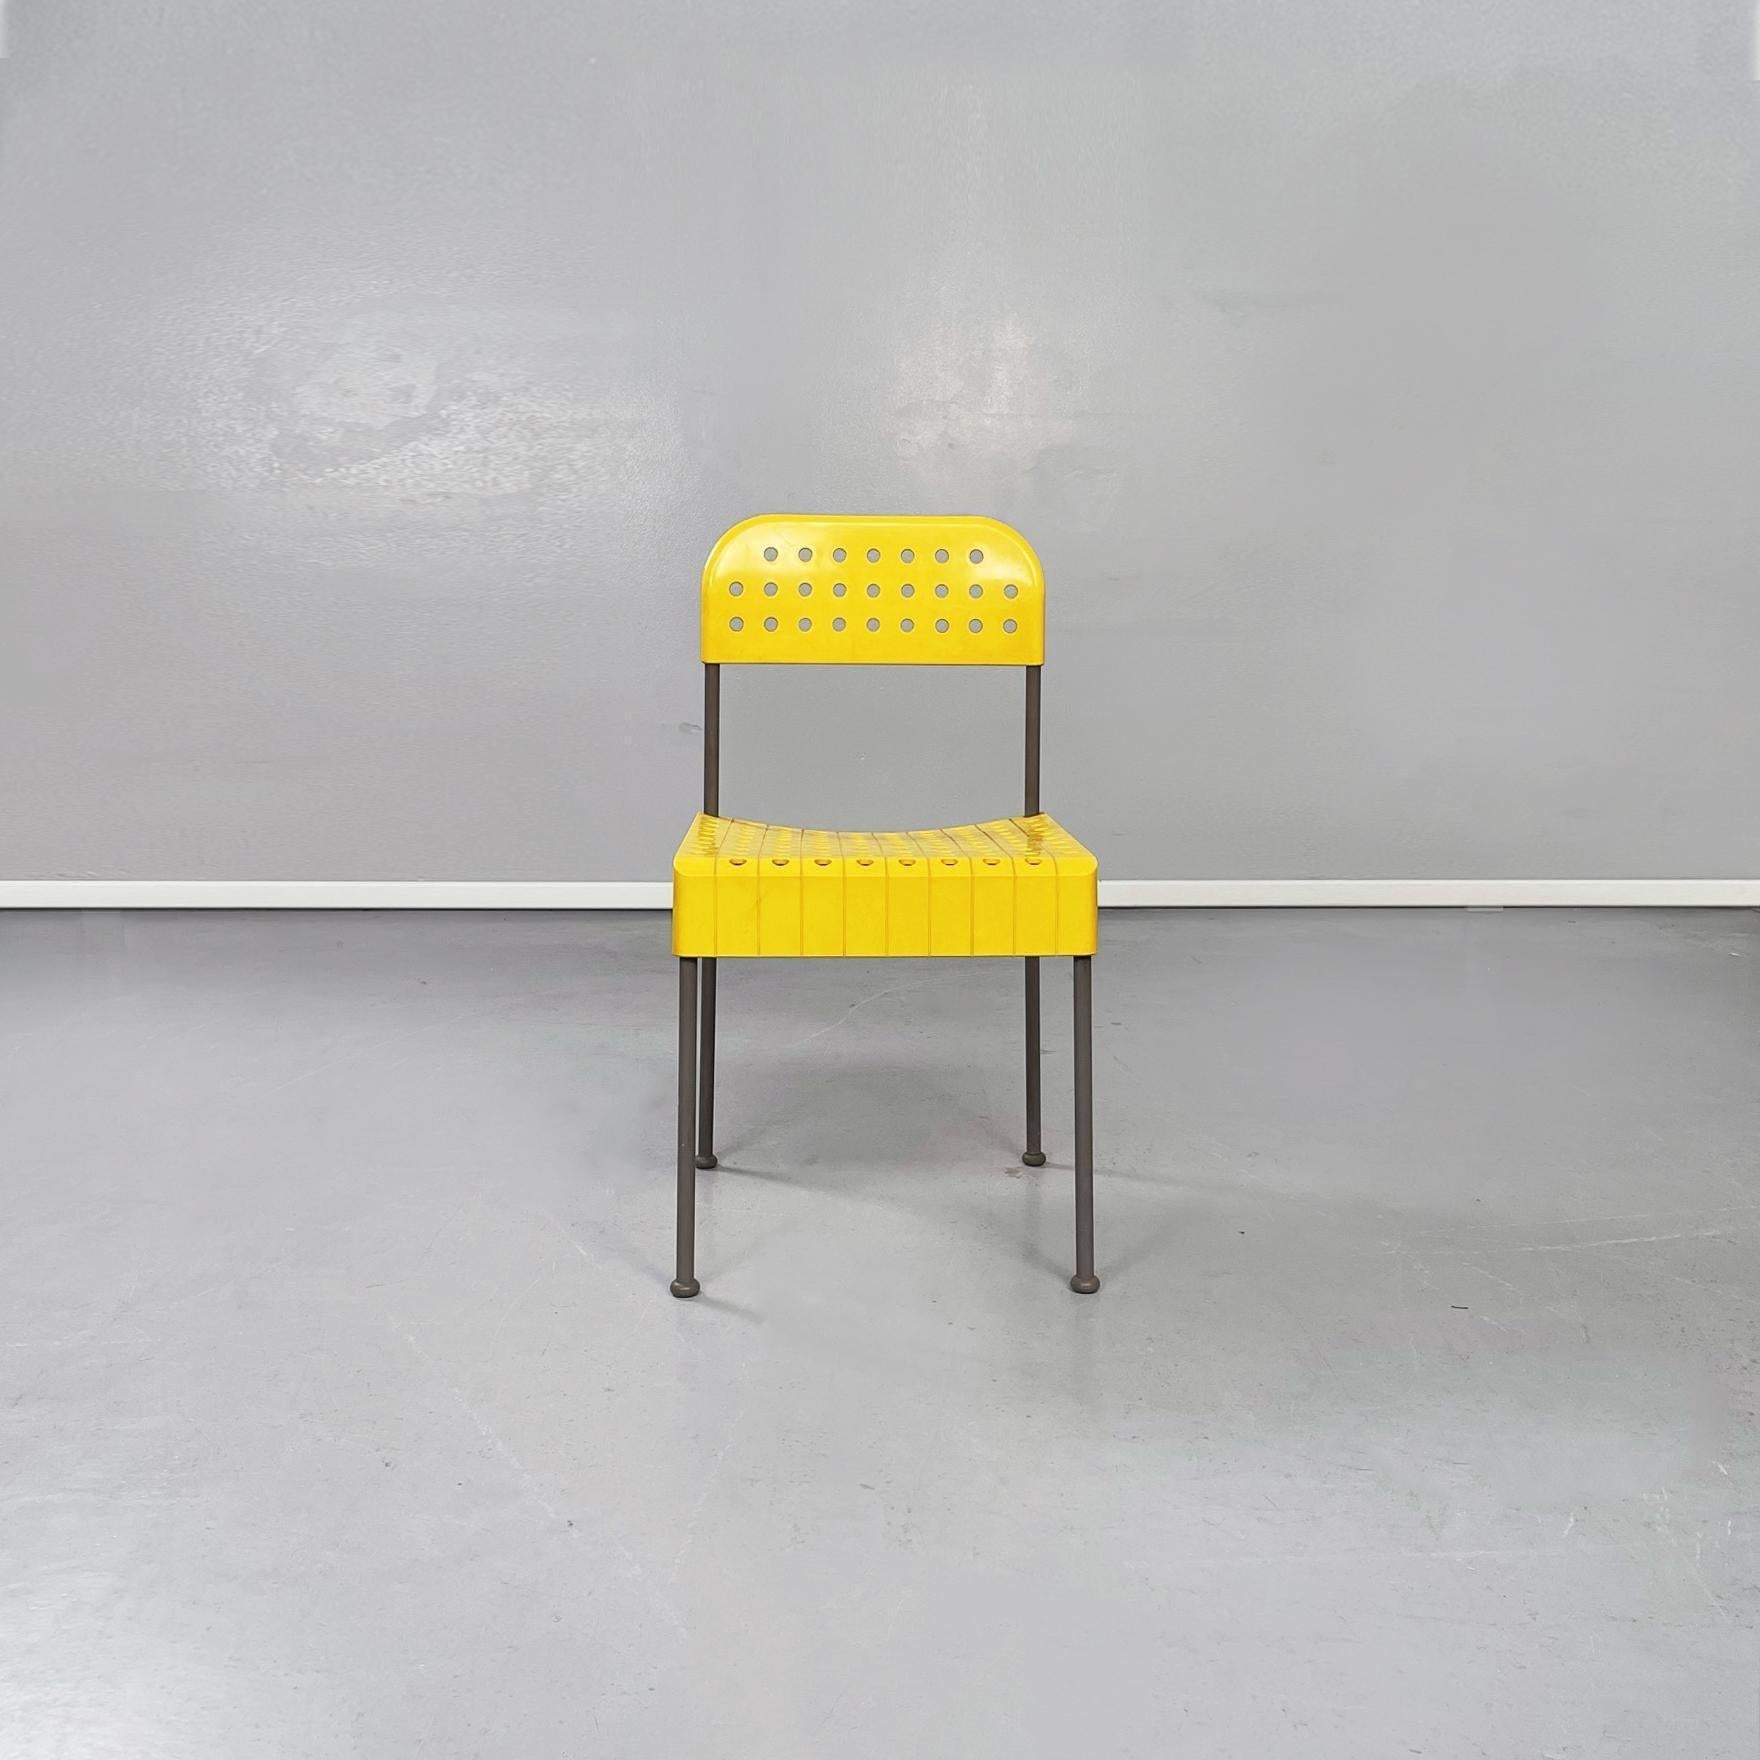 Italian mid-century yellow chair box by Enzo Mari for Castelli, 1970s.
Box model chair with square and perforated seat in yellow plastic and structure in gray plastic. 
Produced by Castelli in 1970s and designed by Enzo Mari in 1971. Brand